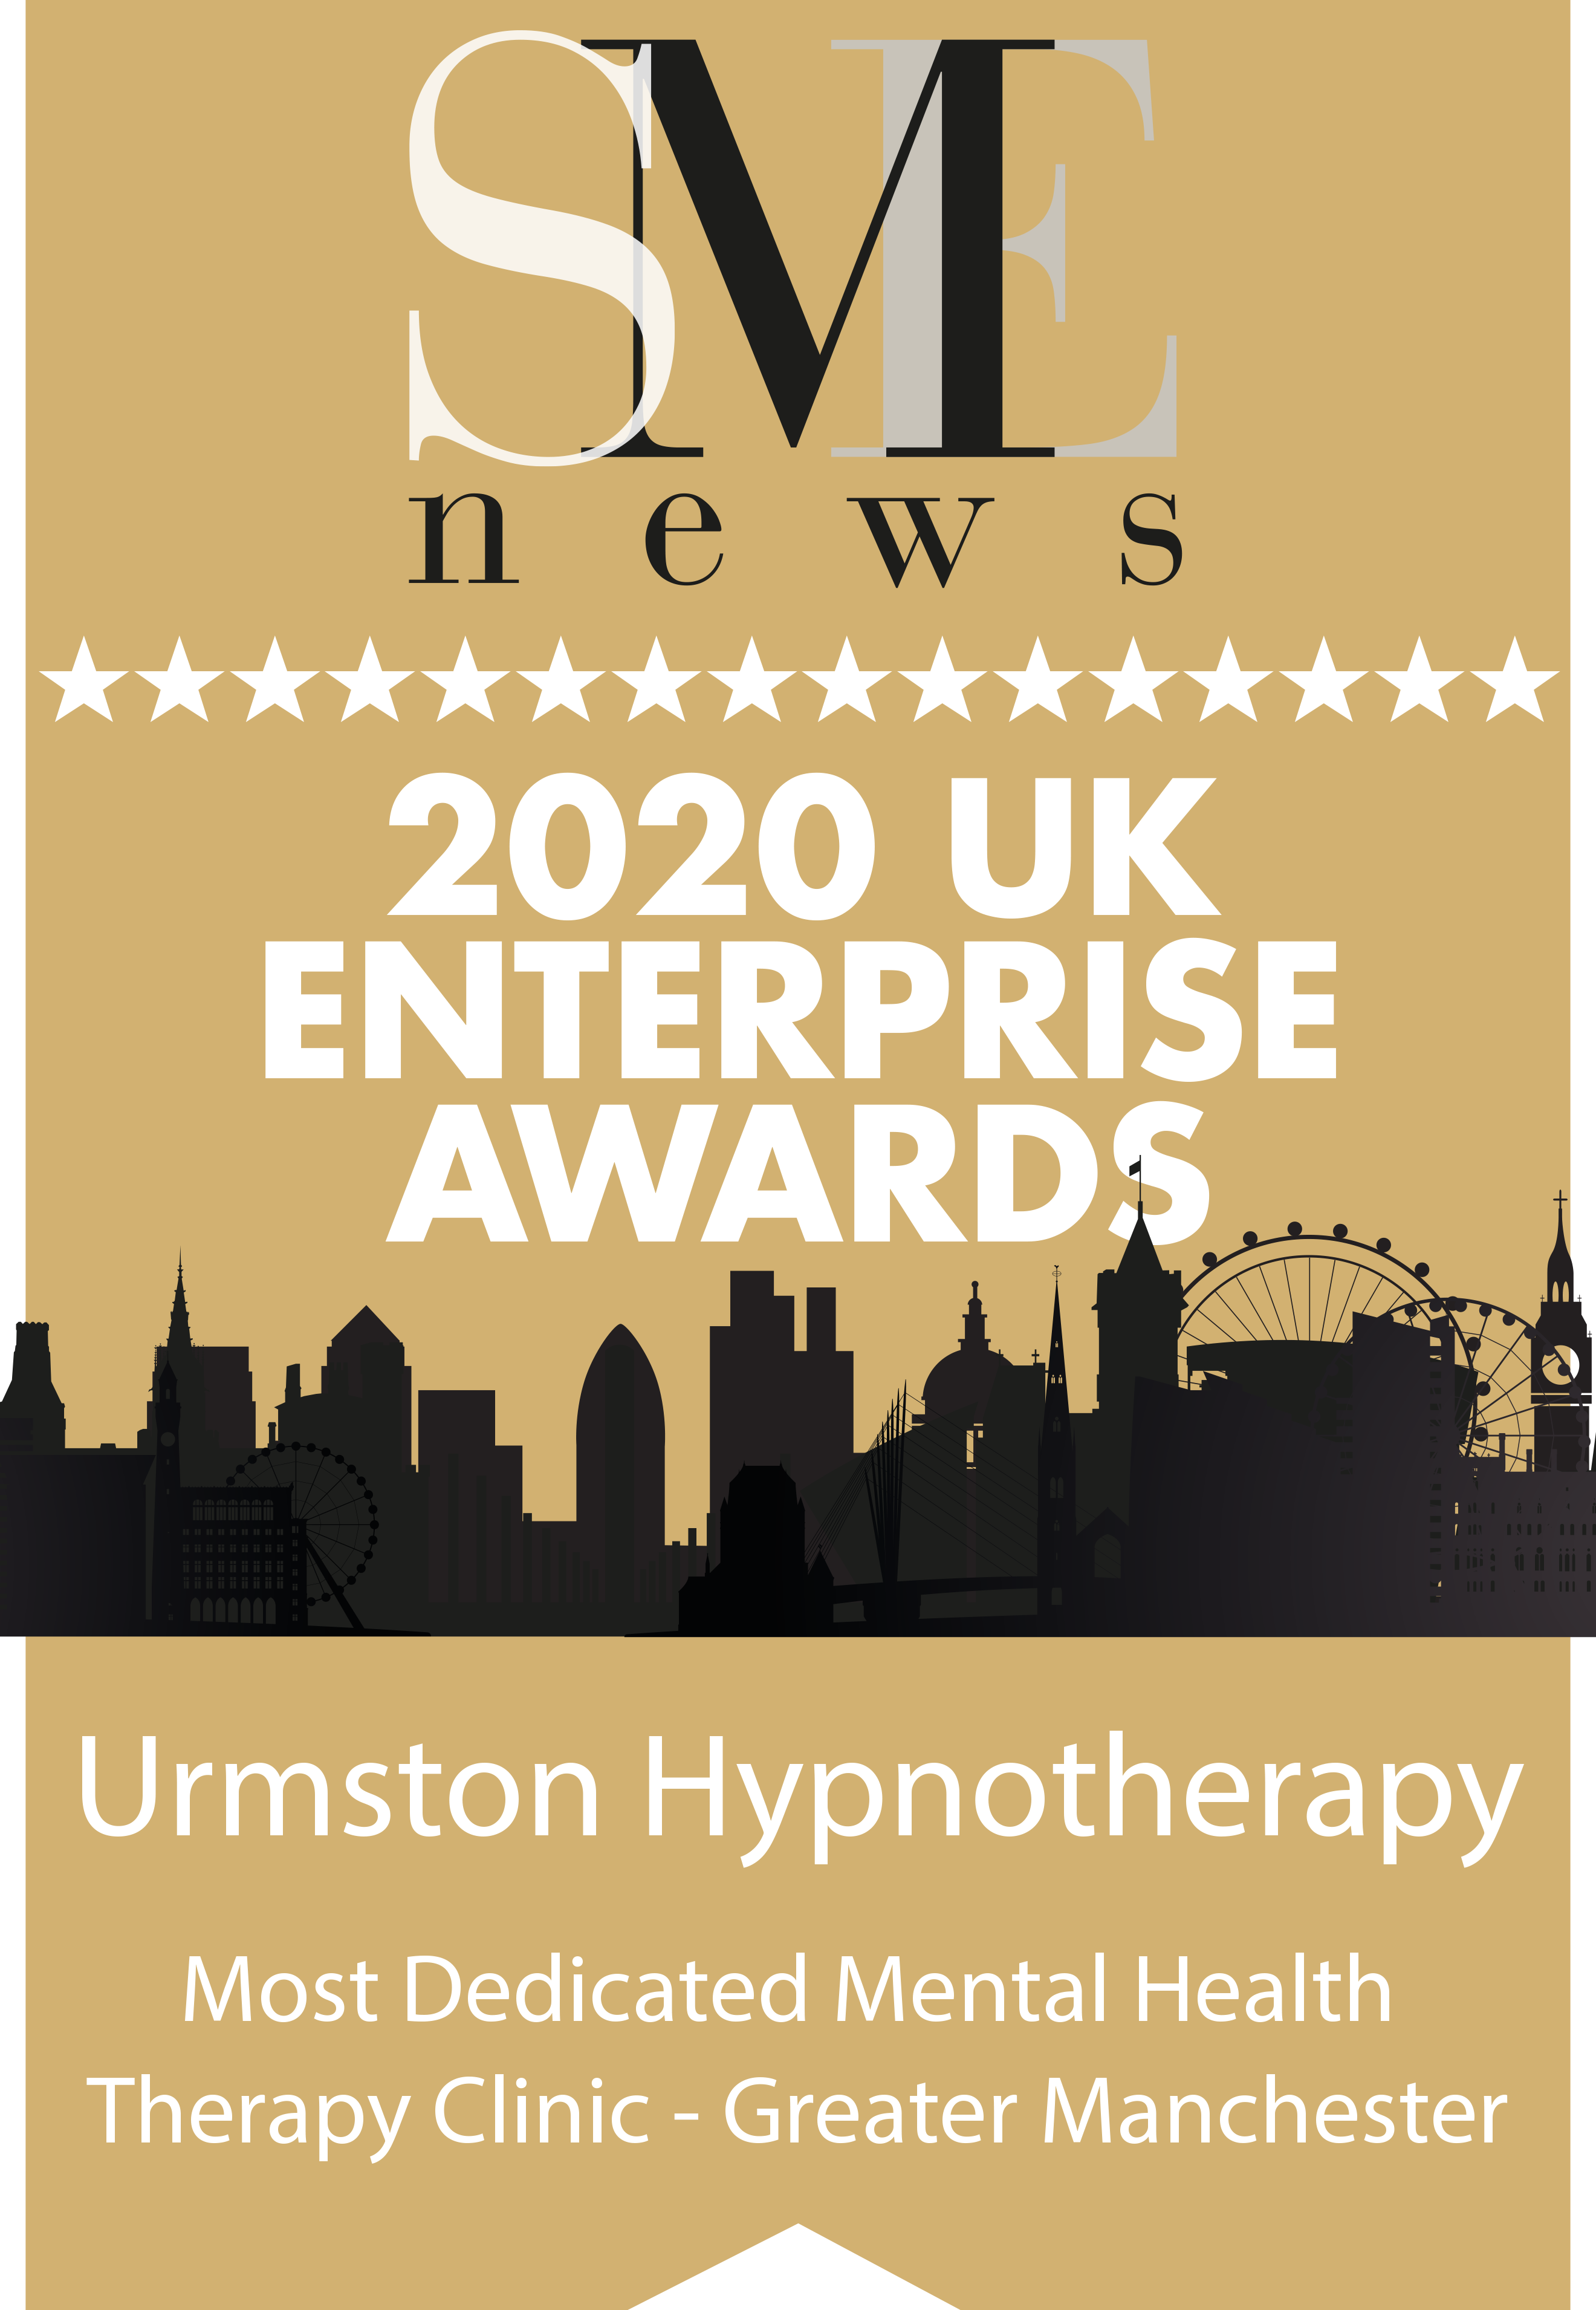 Urmston Hypnotherapy and Psychotherapy